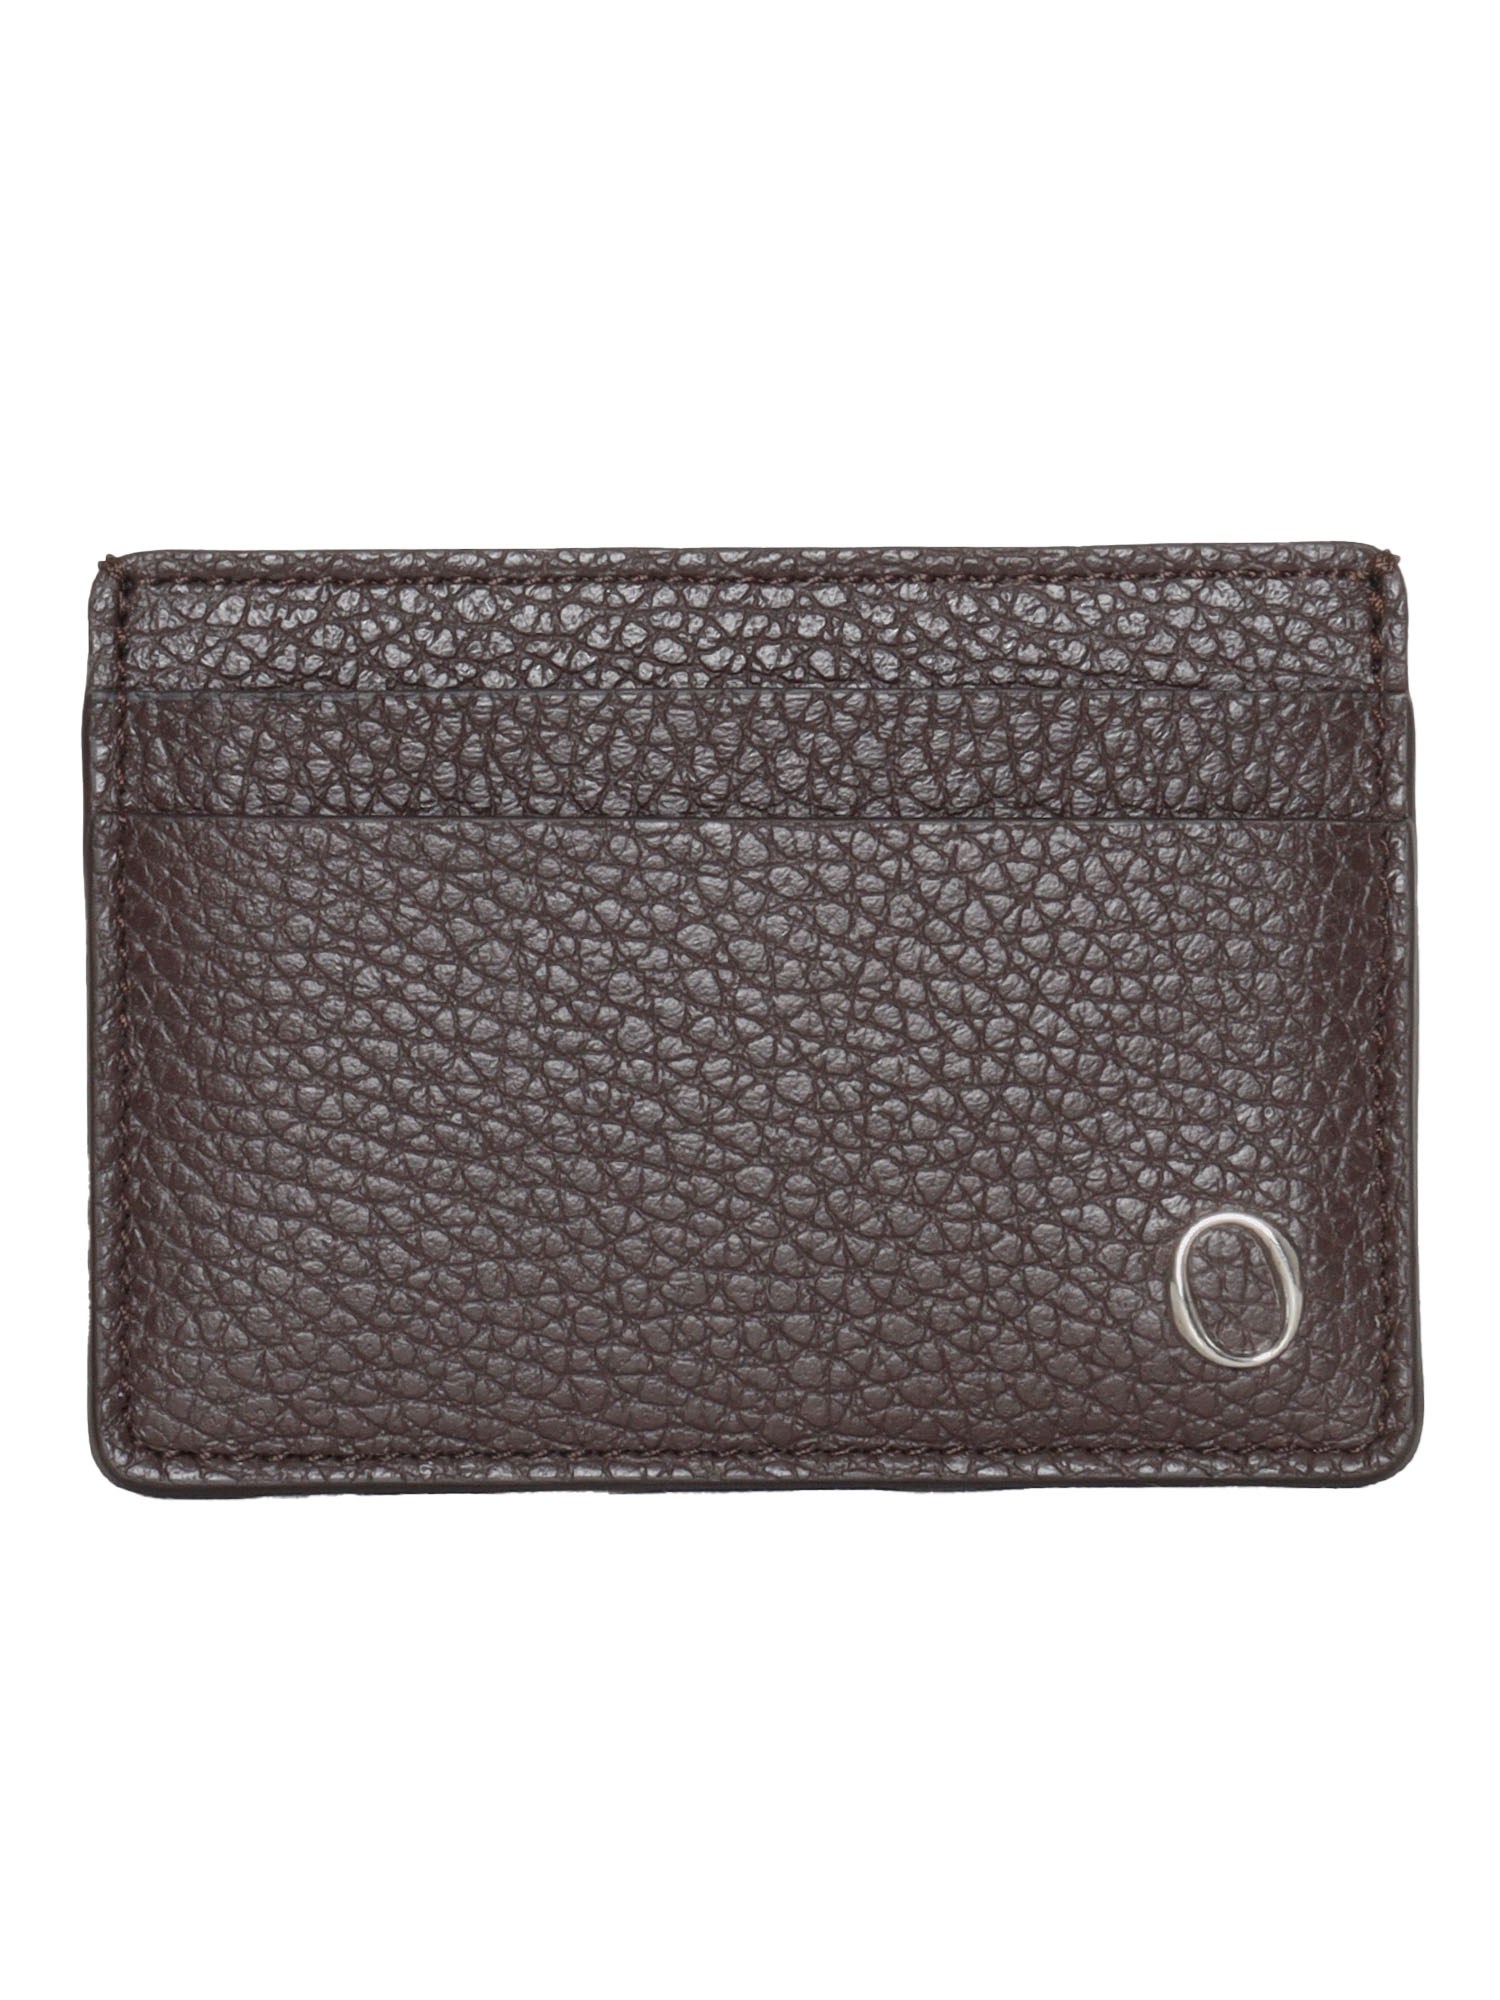 Orciani Micron Card Holder In Brown